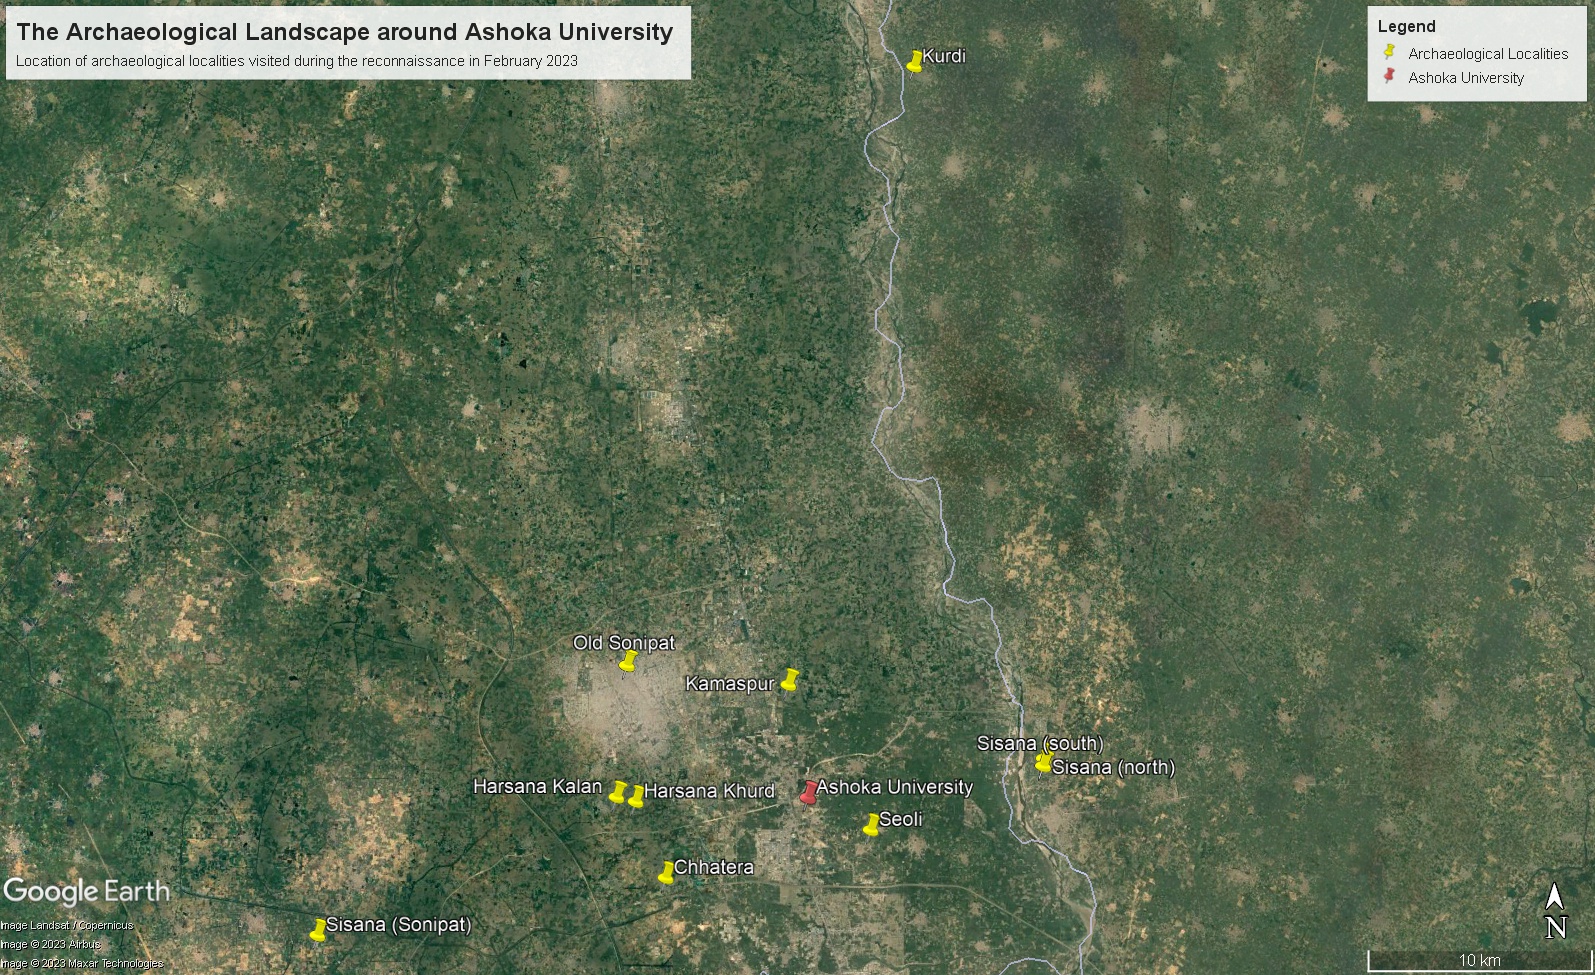 Location of archaeological sites investigated during the course of reconnaissance fieldwork in February 2023